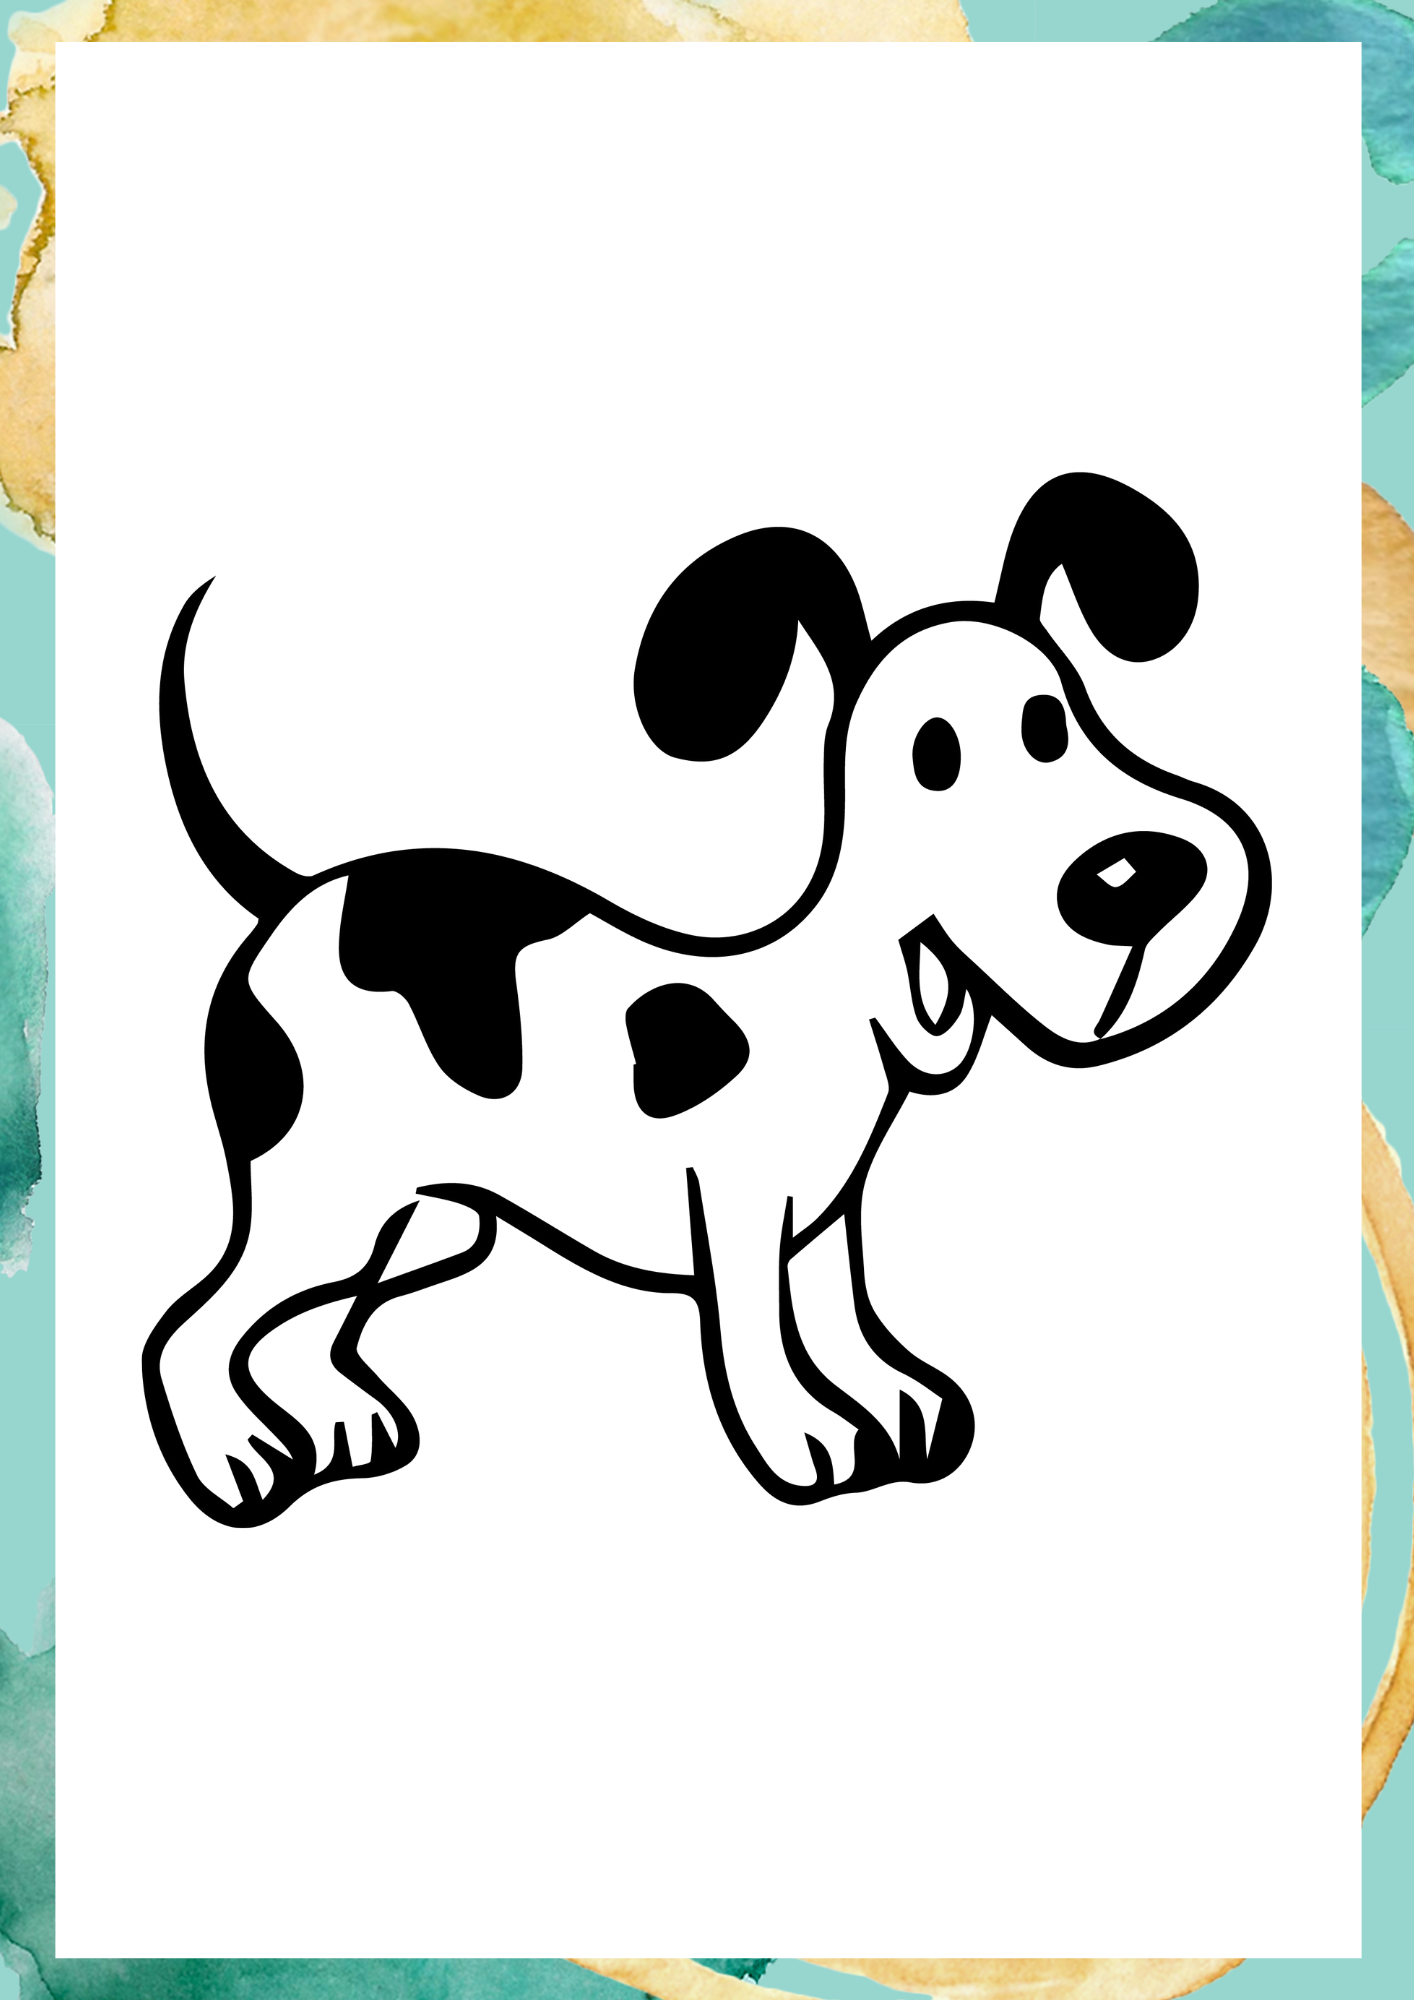 dog coloring page, animal coloring page, coloring page, coloring page for toddlers, Coloring Page, coloring sheet, happy color, colouring, free coloring pages, coloring pages for kids, printable coloring pages, cute coloring pages, colouring pages, colouring to print,free printable coloring pages, free coloring pages for kids, easy coloring pages, coloring sheets